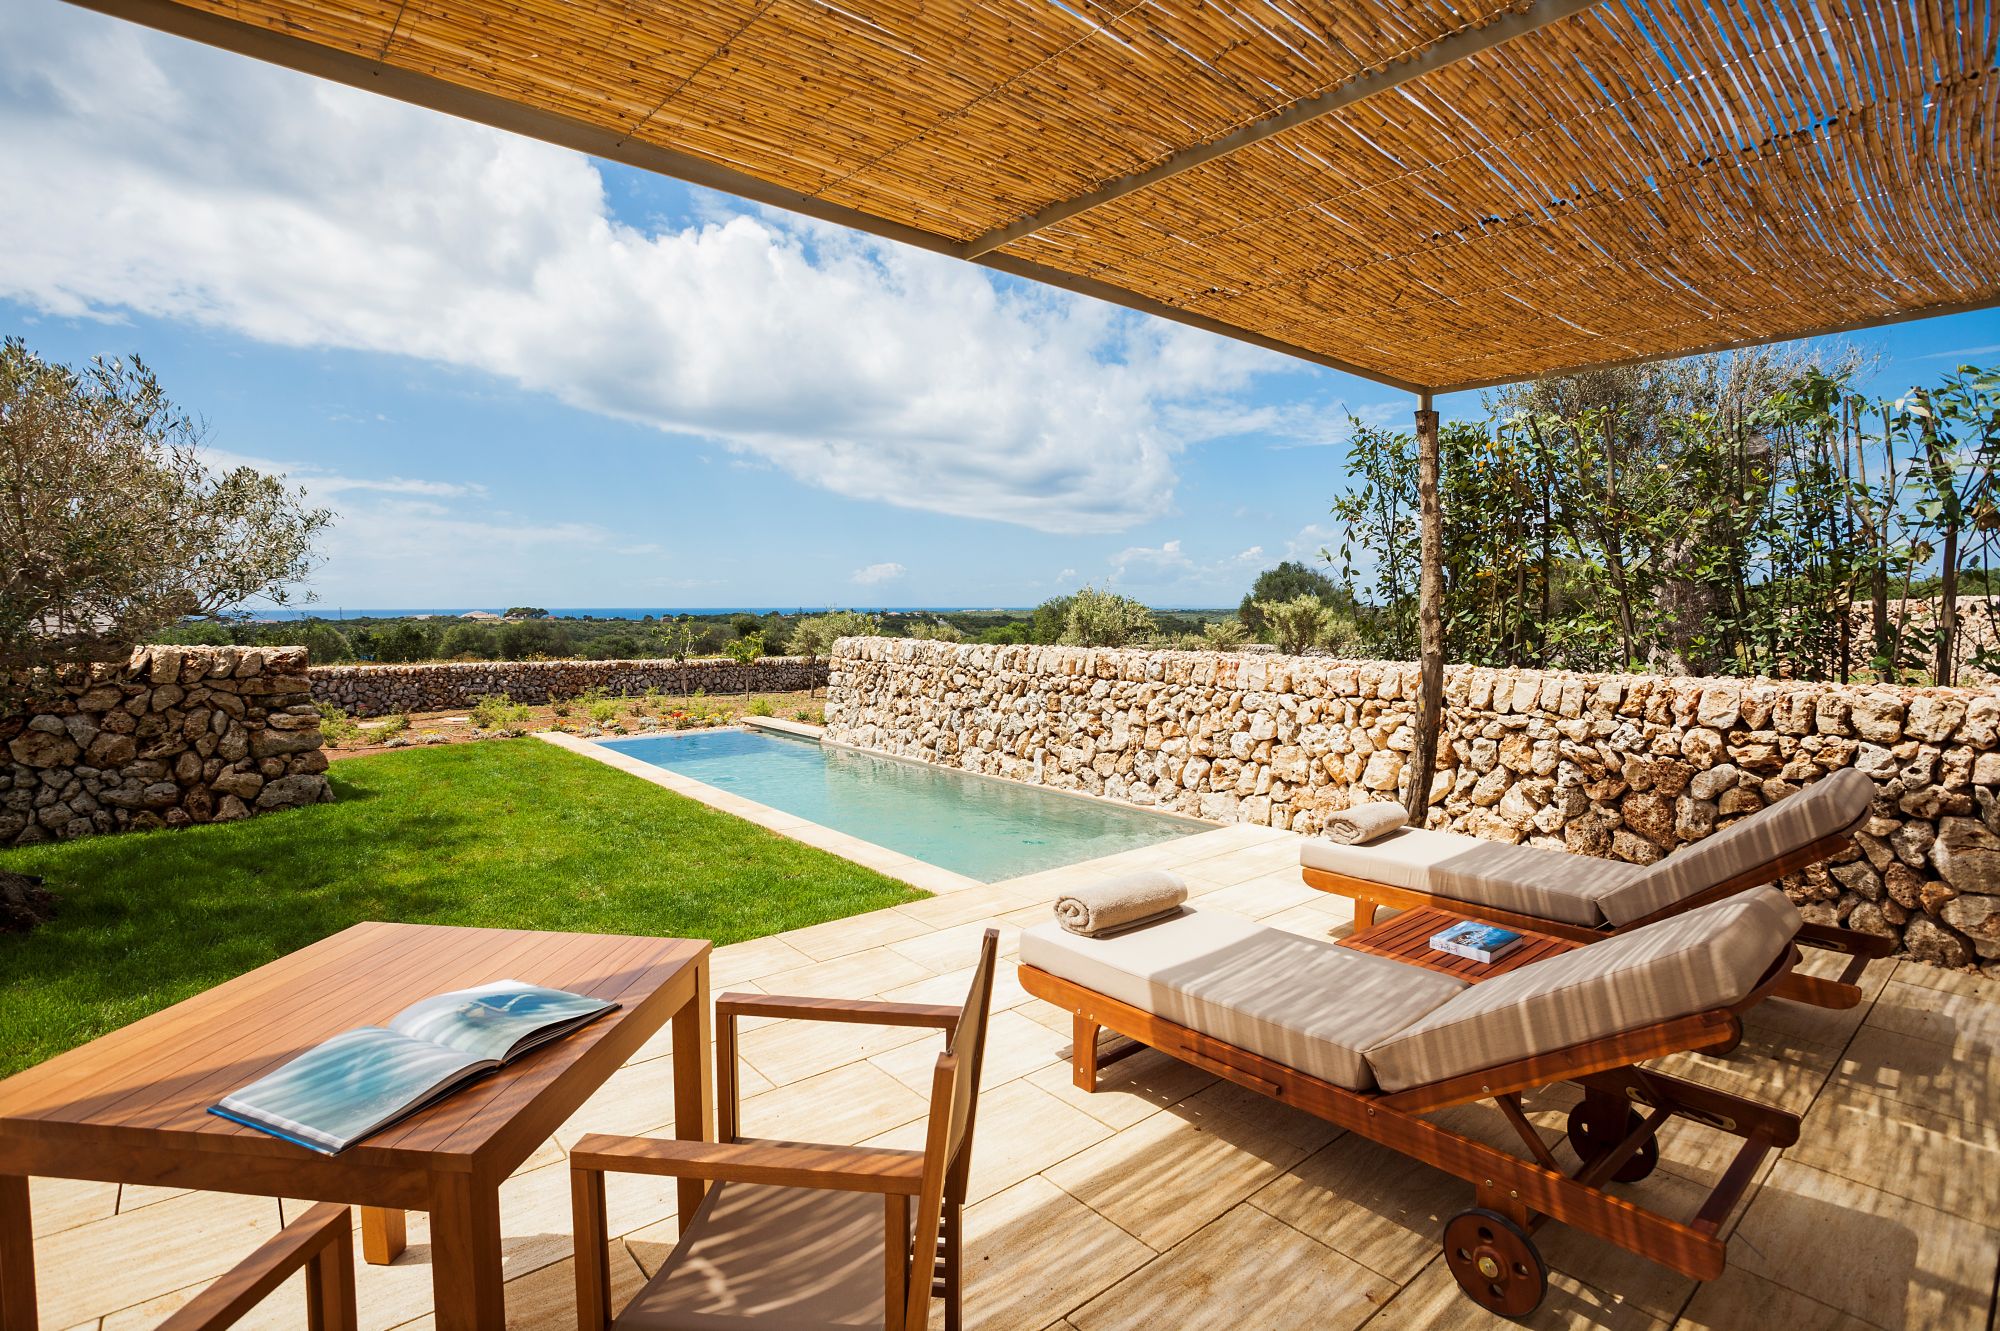 The pool cottage of Hotel Torralbenc, Spain